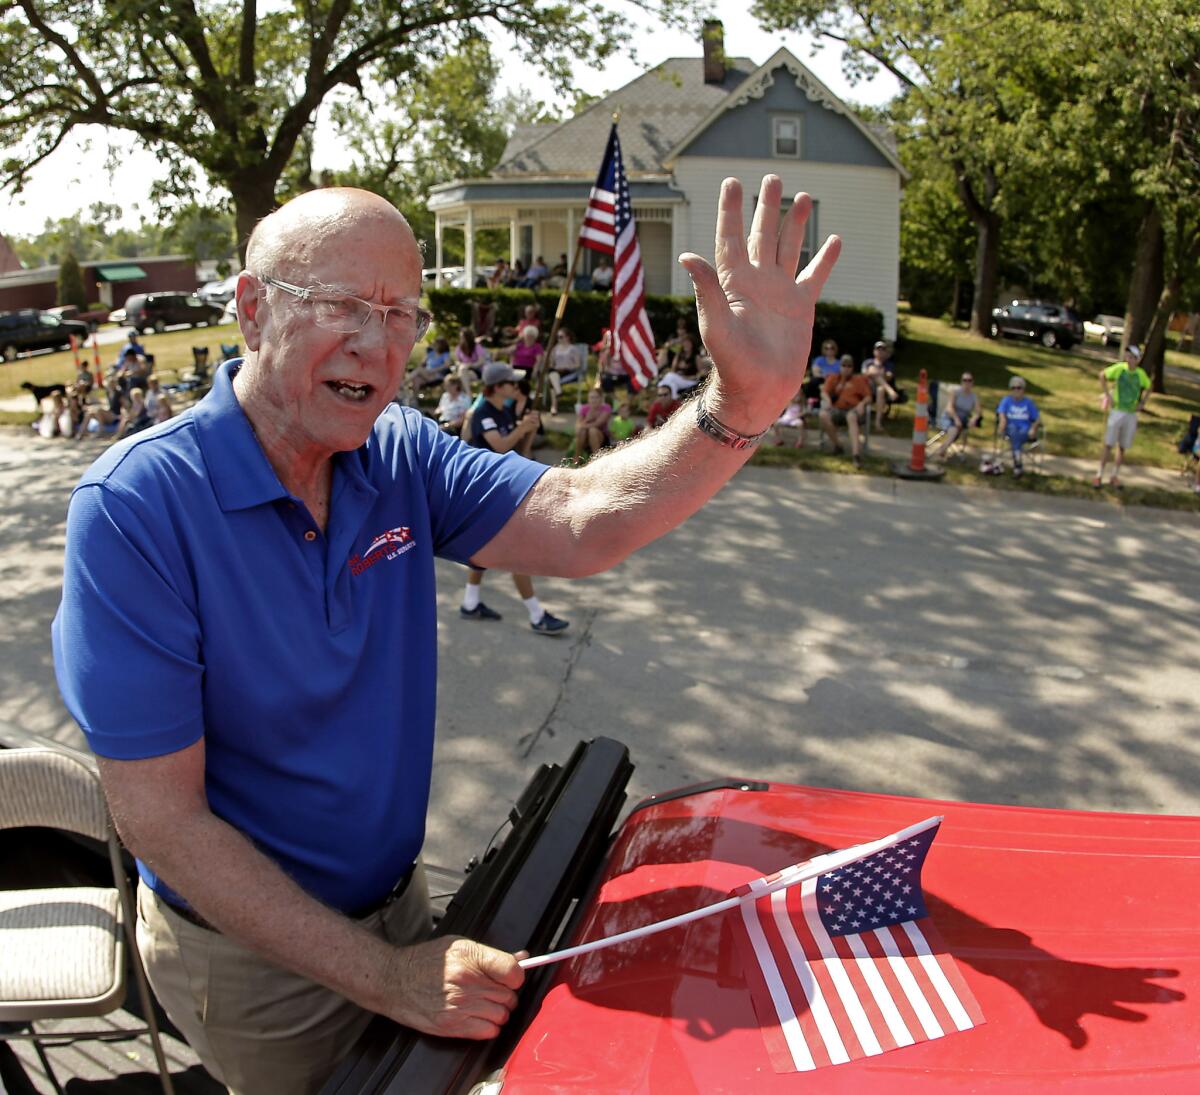 U.S. Sen. Pat Roberts waves to the crowd as he rides on the back of a pickup in a parade Saturday in Gardner, Kan. Roberts is facing tea party-backed challenger Milton Wolf in the primary election Tuesday.